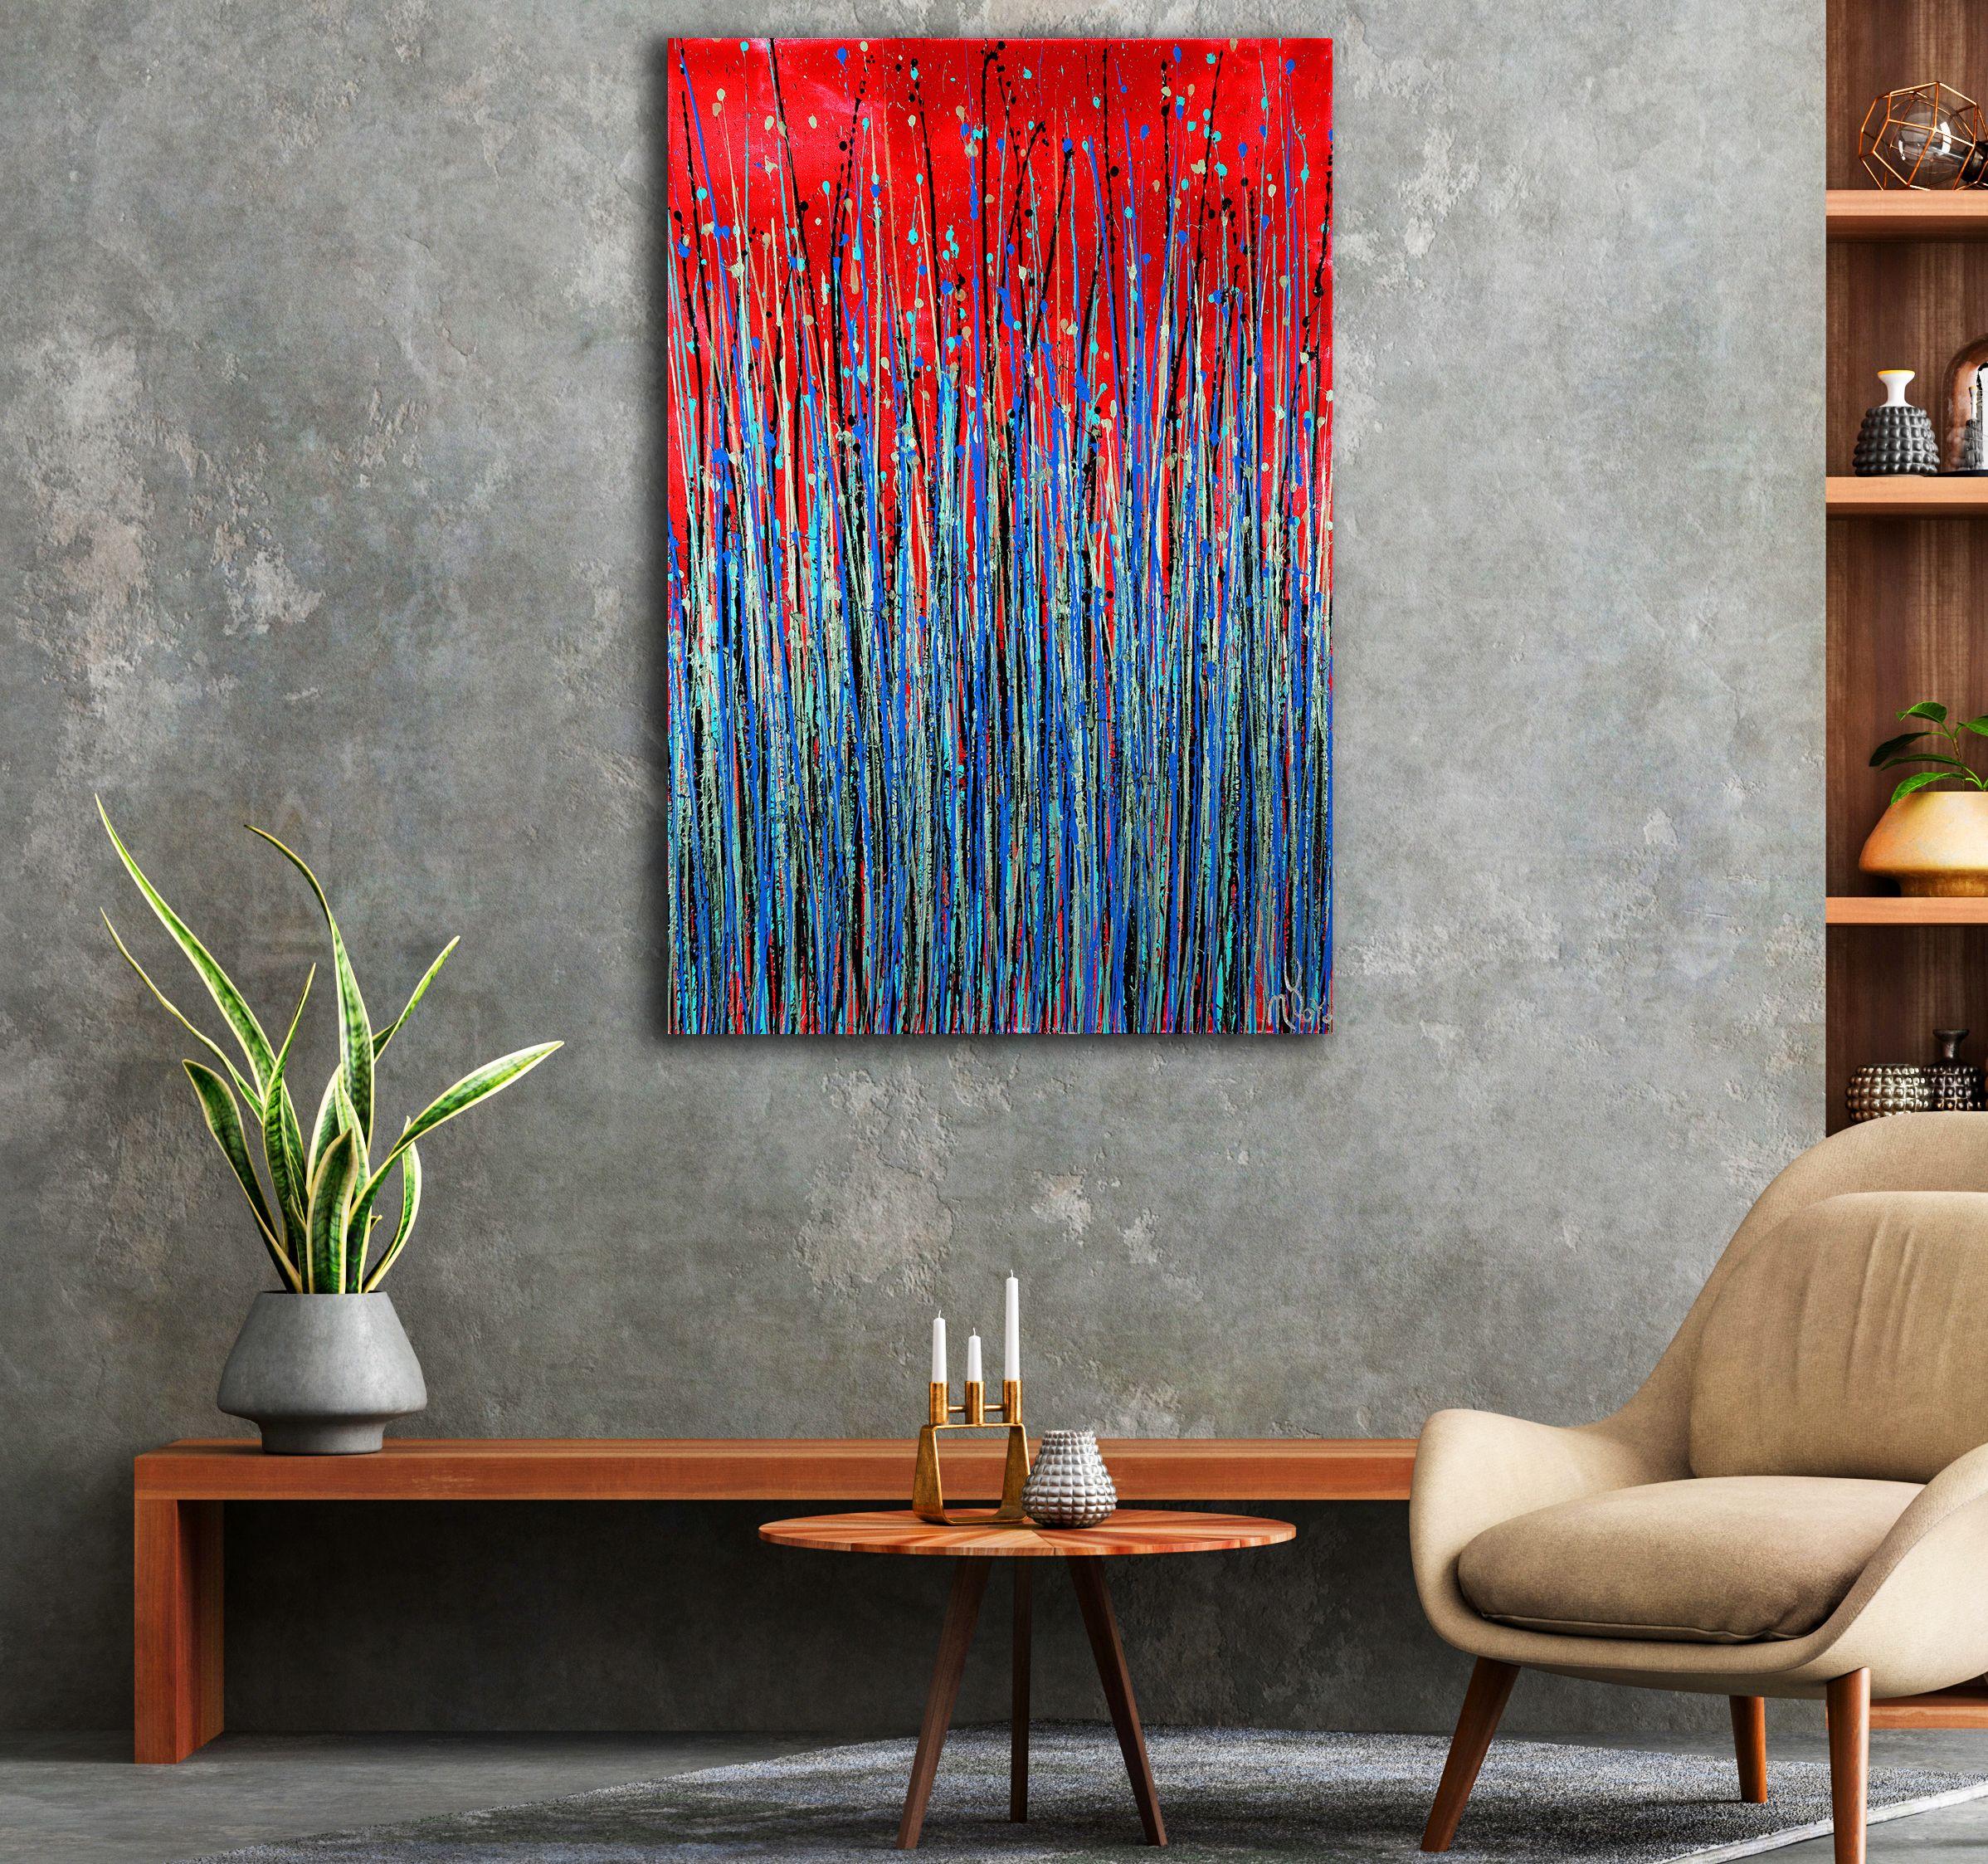 Expressive modern abstract, bold full of life, gloss and shimmer! inspired by nature. Shades of iridescent green, blue, indigo, silver, green over red background. signed in front.    I include a certificate of authenticity that lists the materials